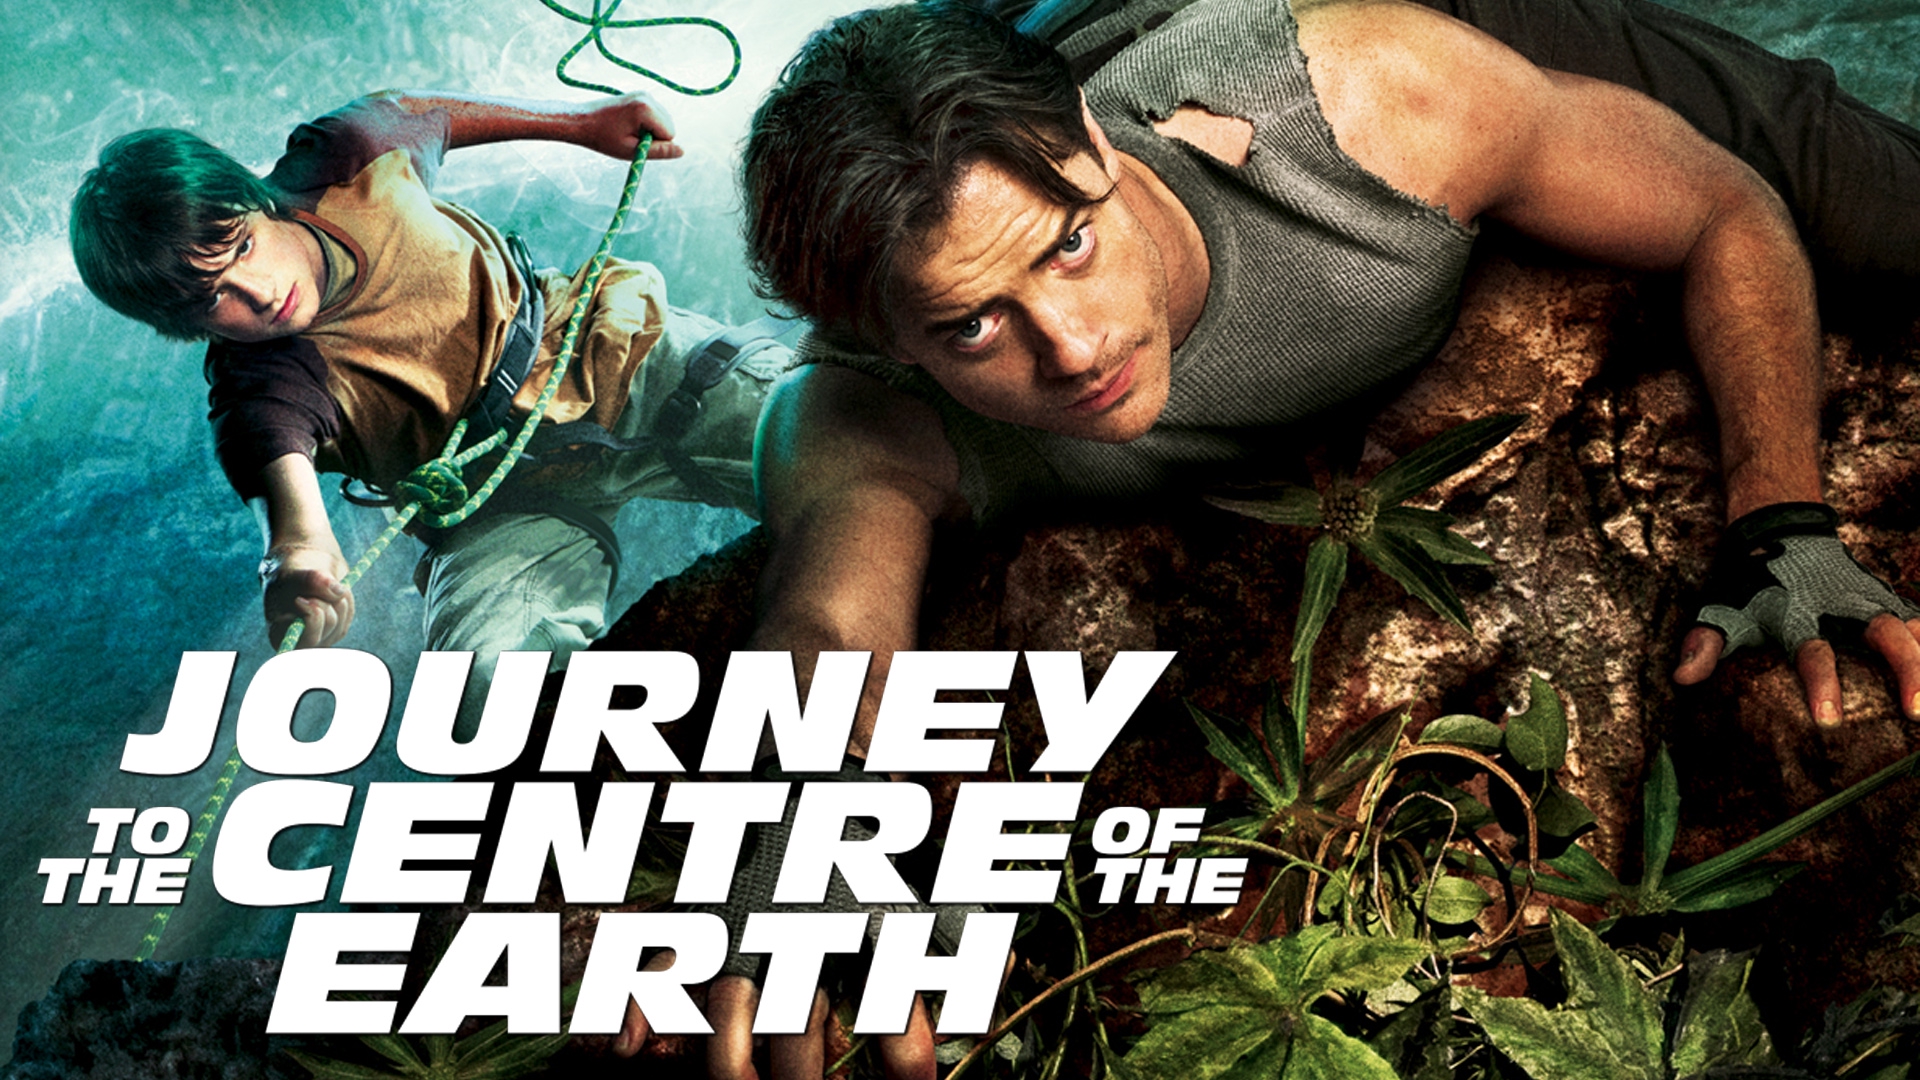 journey to the center of the earth full movie free